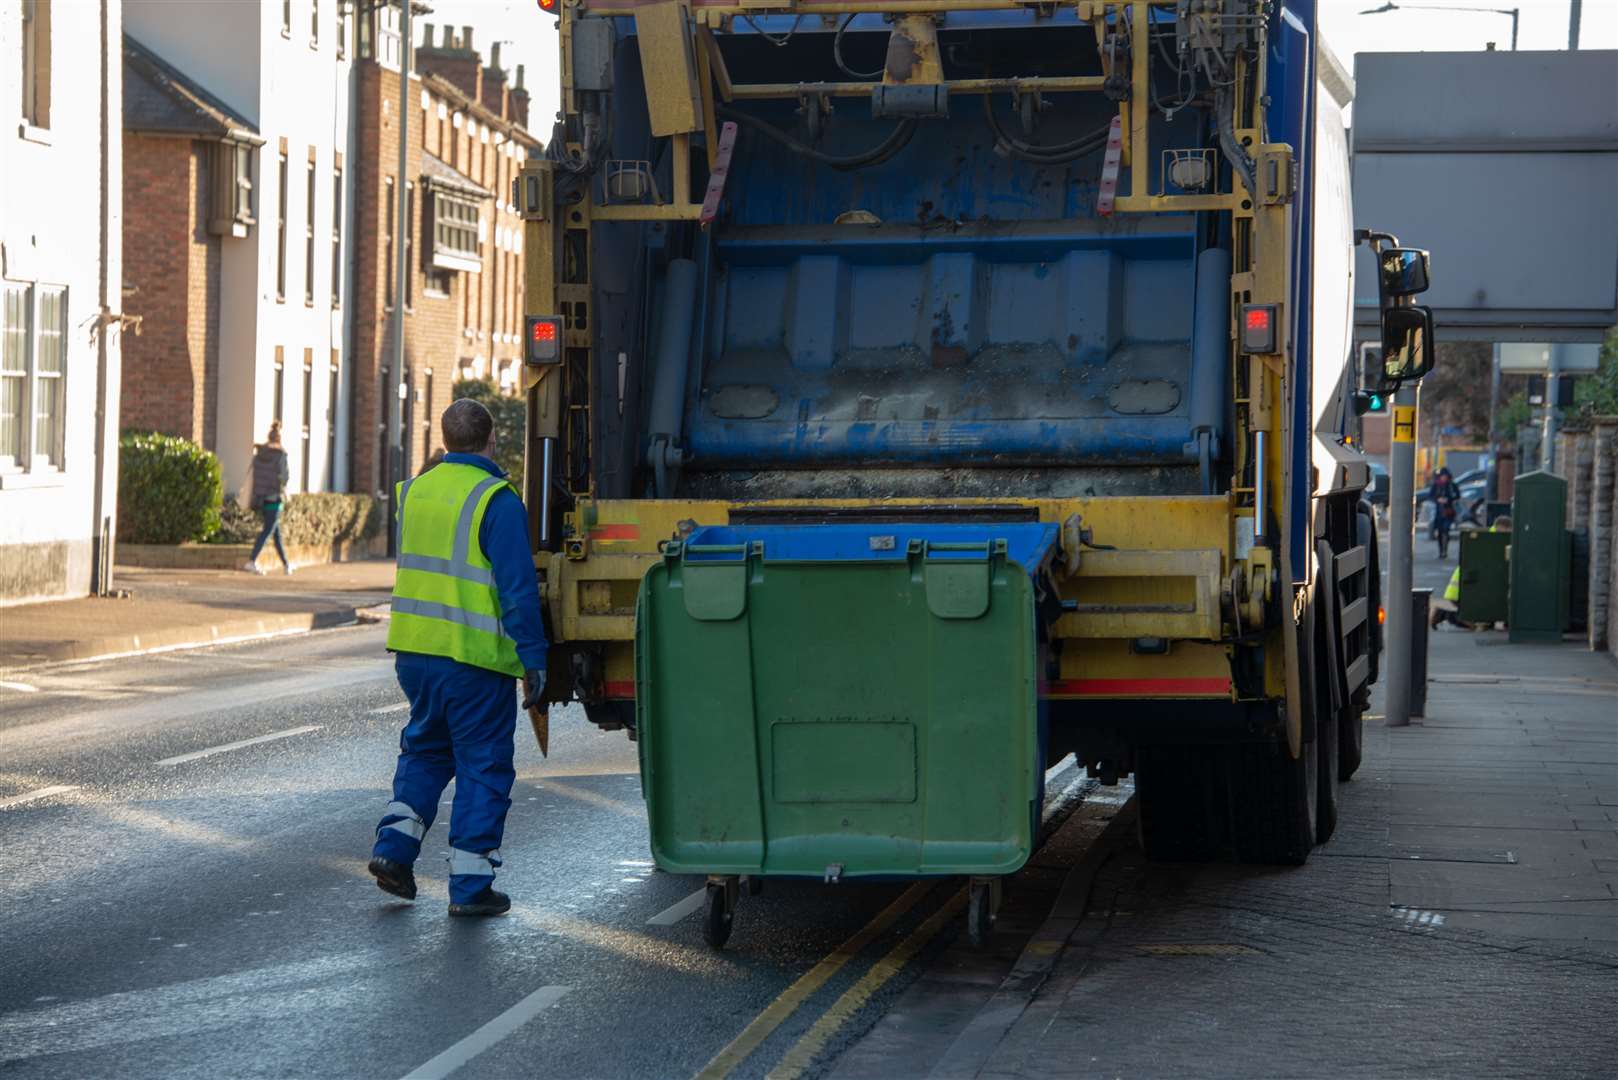 Ashford Borough Council has partnered up with SUEZ, which will provide the waste collection and street cleaning service for the district